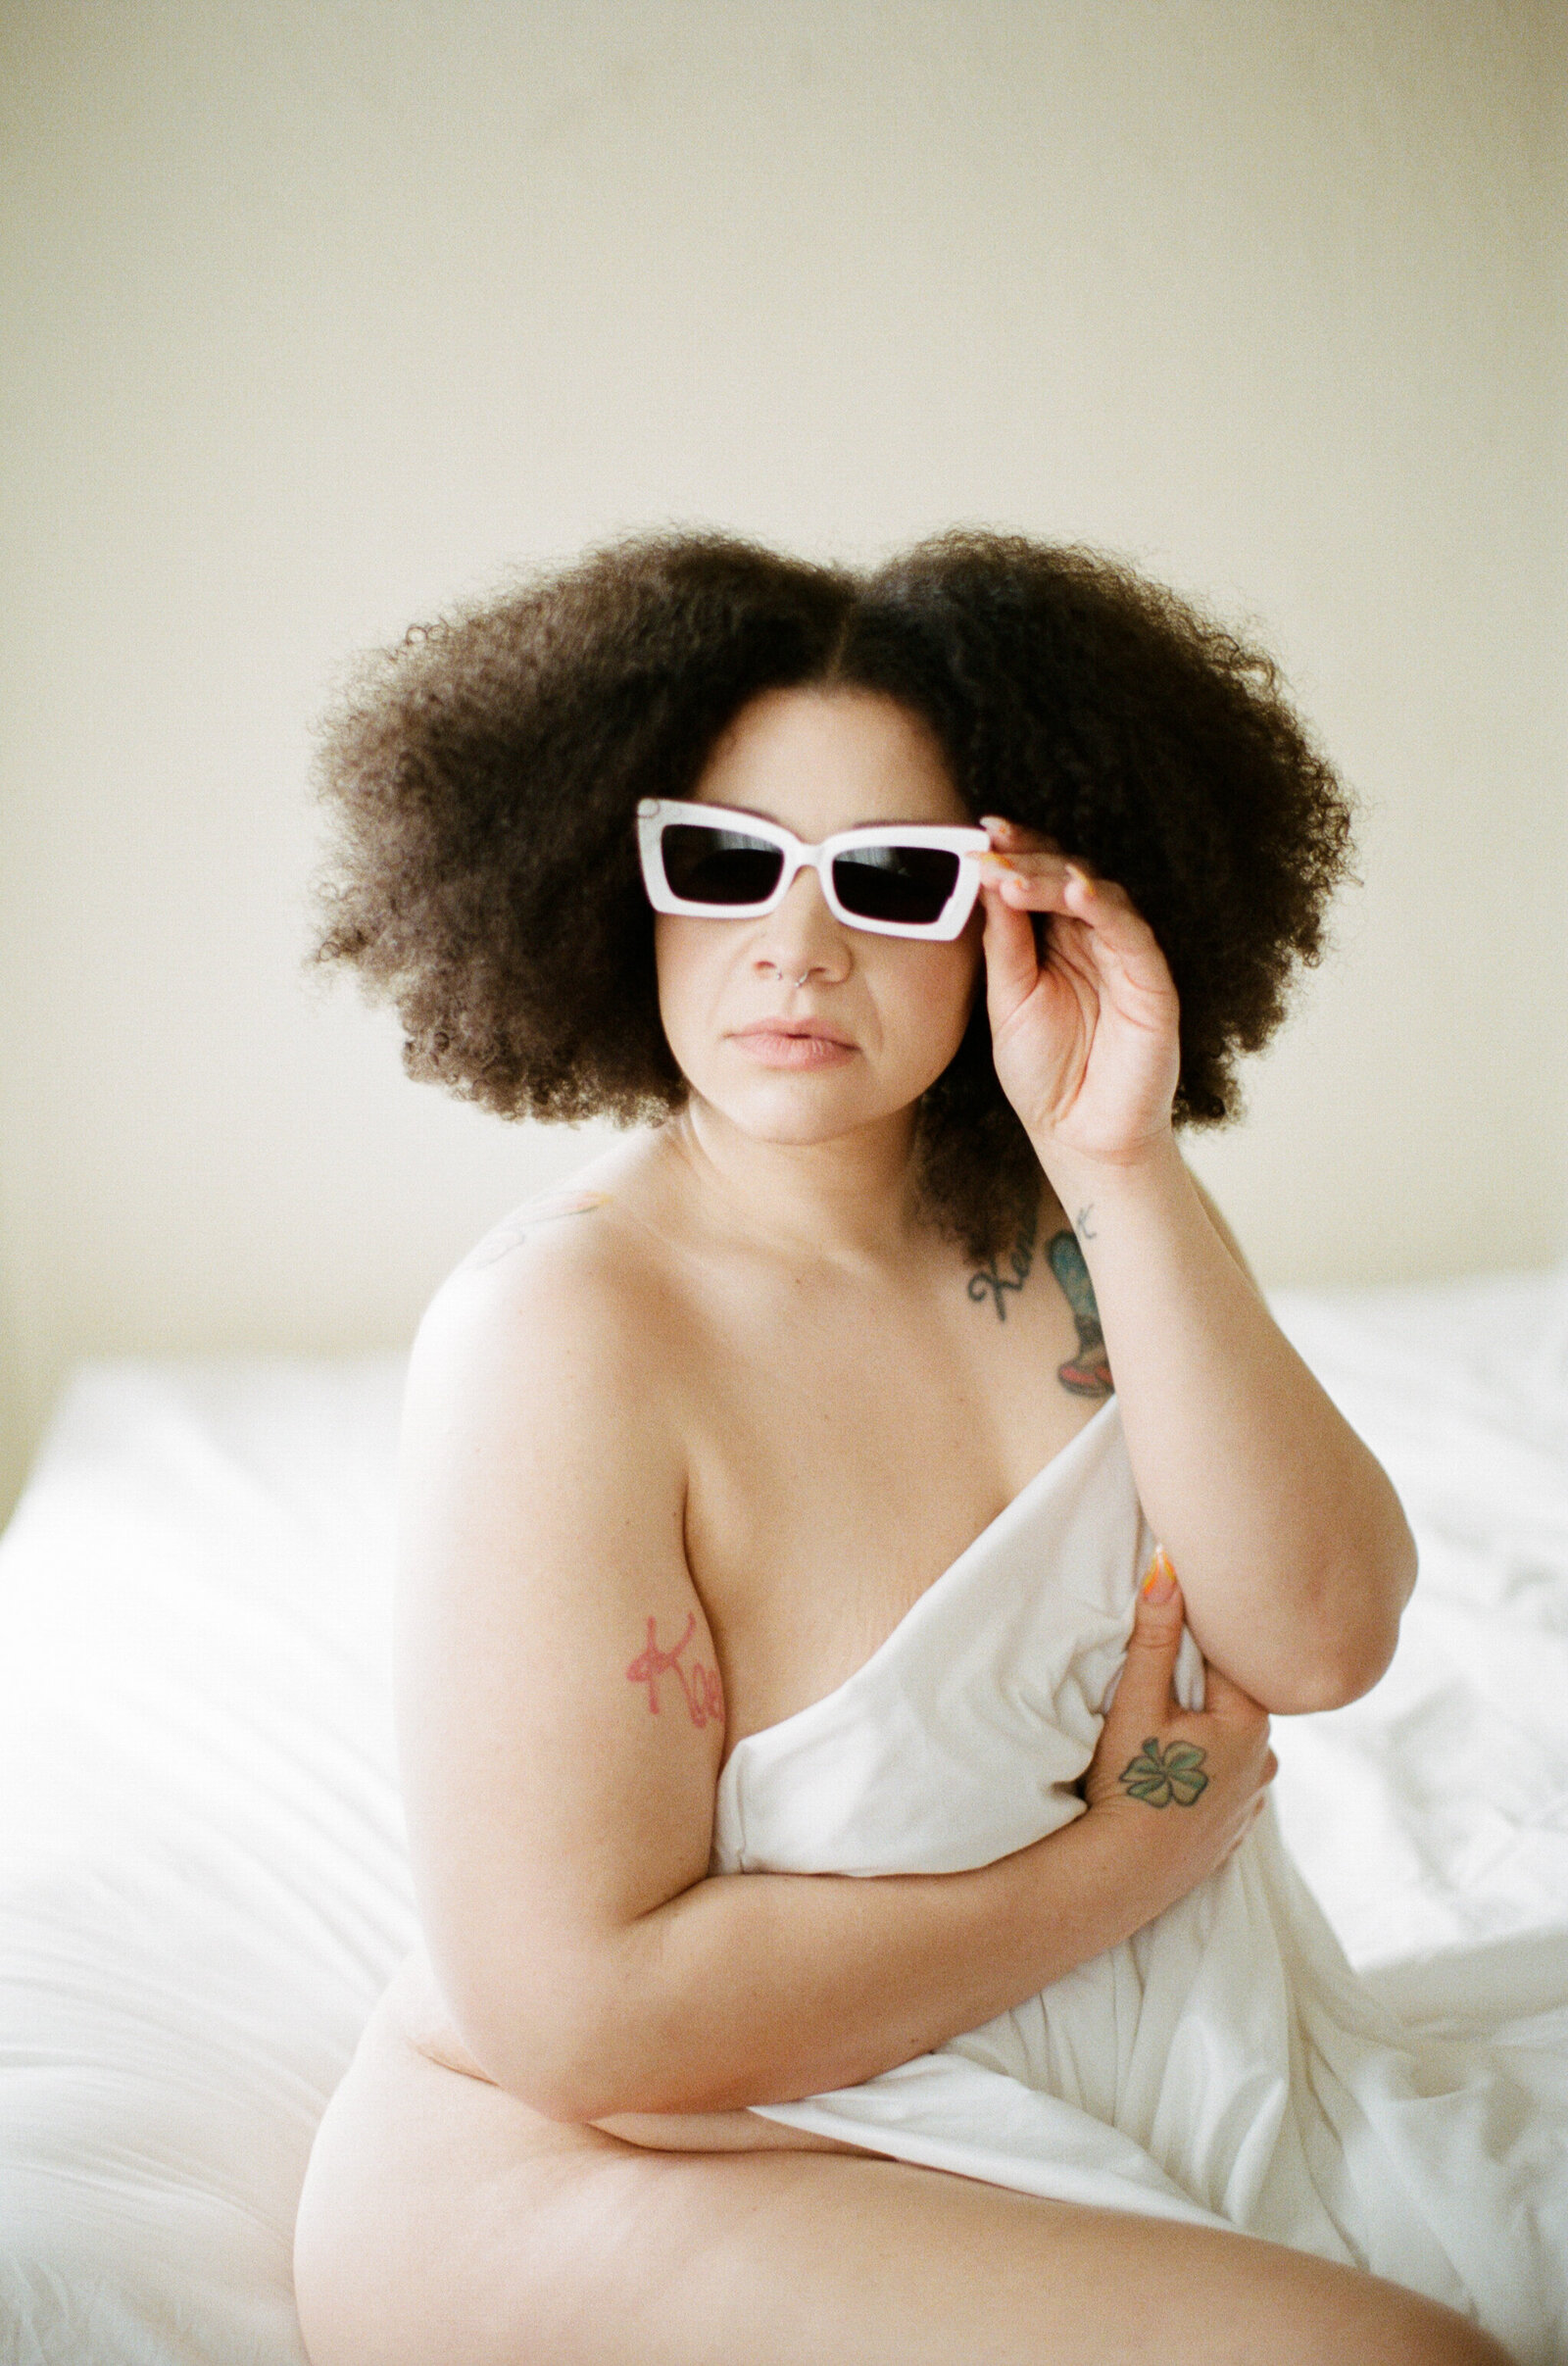 Woman wrapped in sheets wearing sunglasses